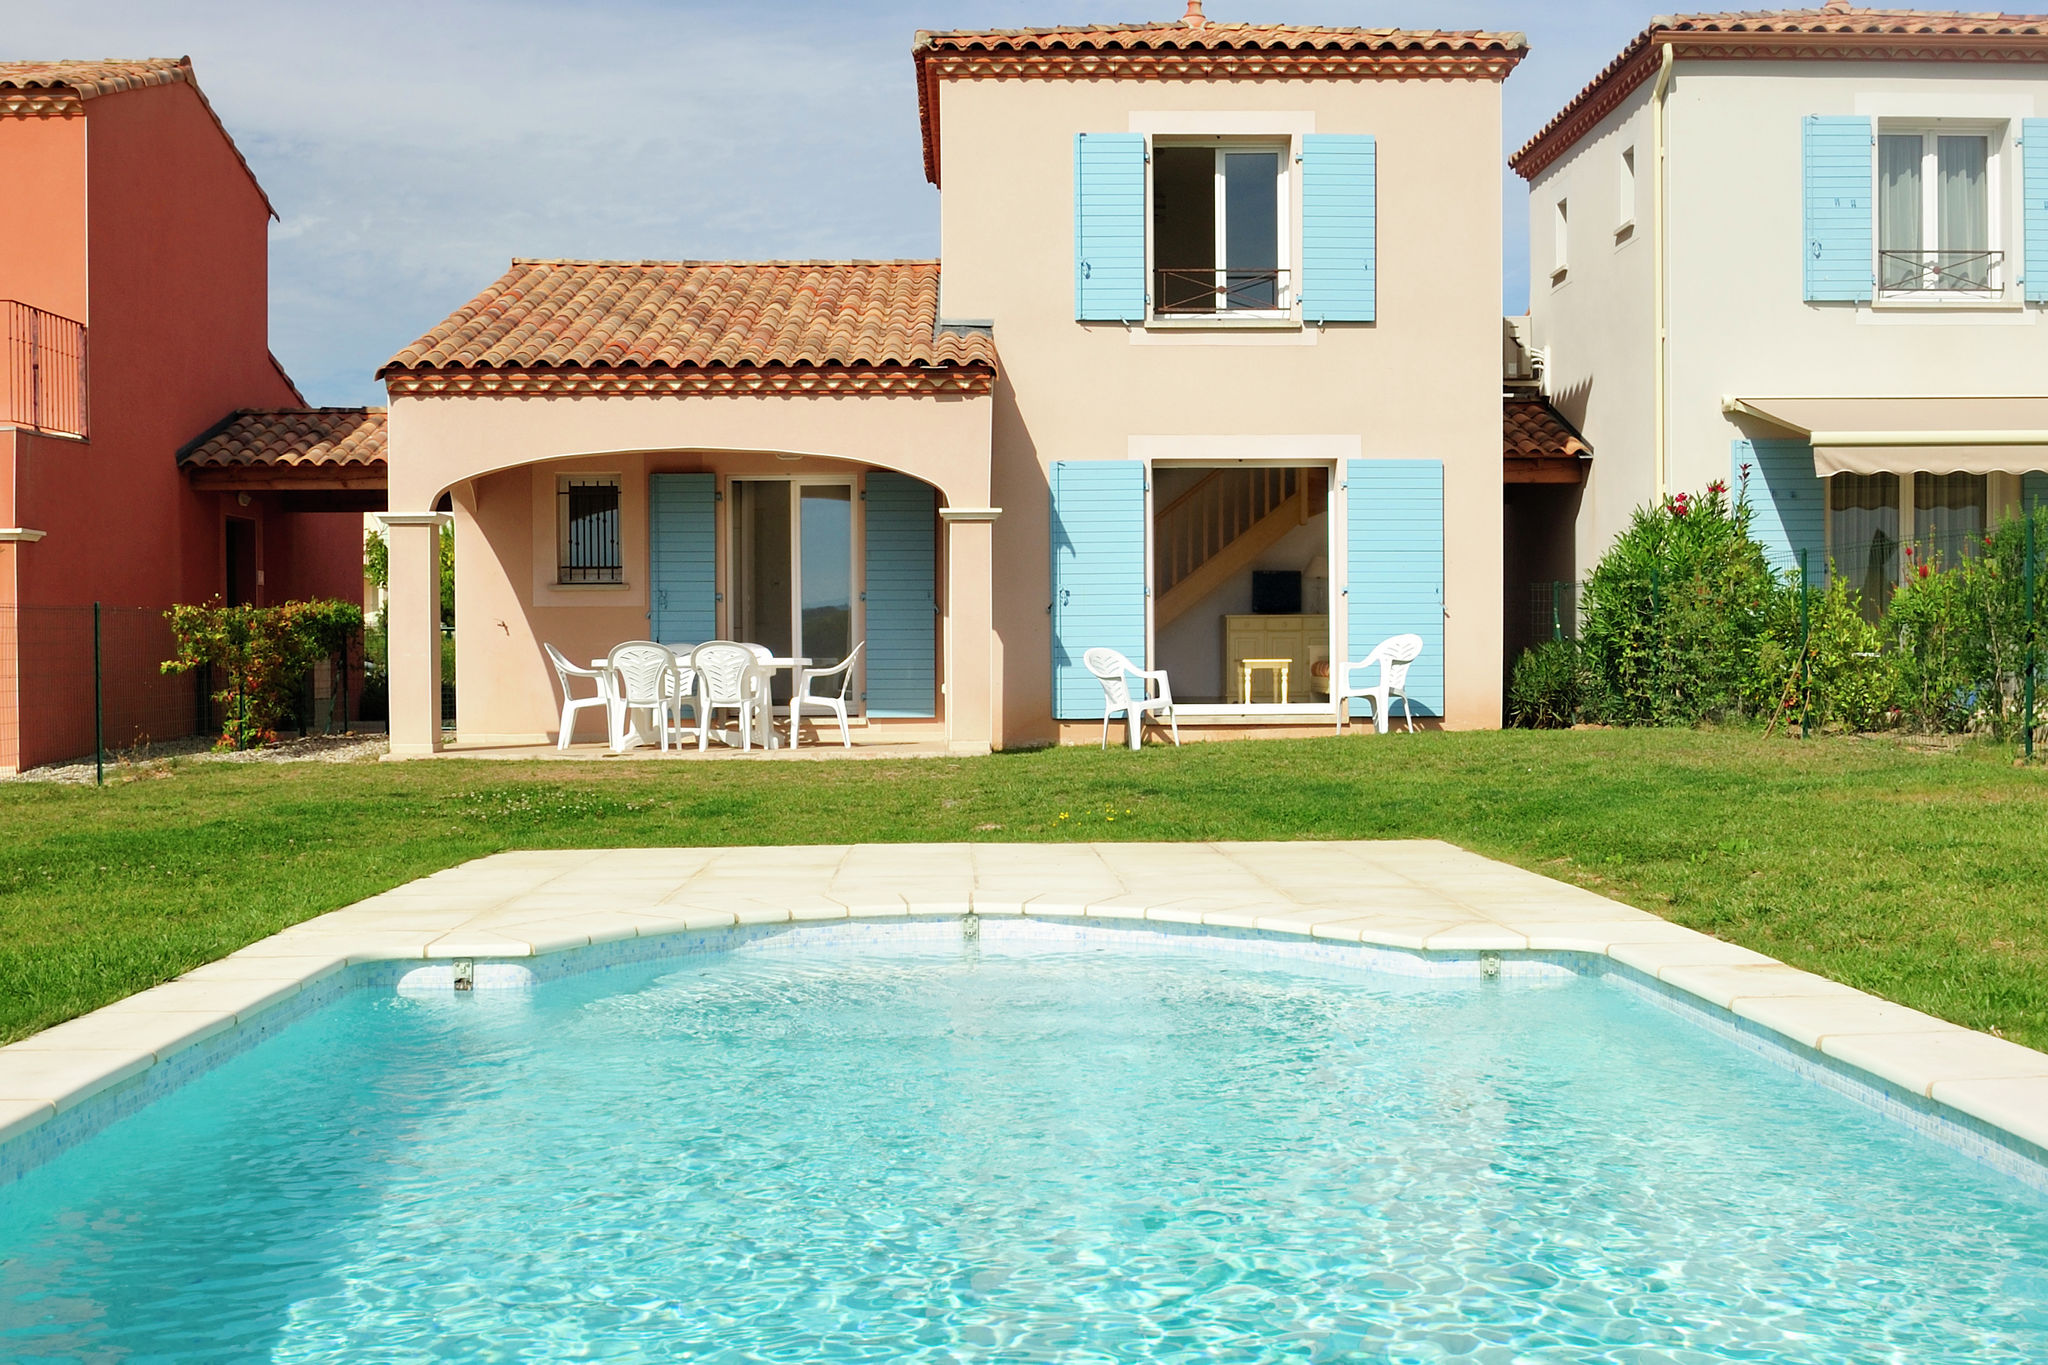 Summer villa with terrace or loggia, located in Languedoc